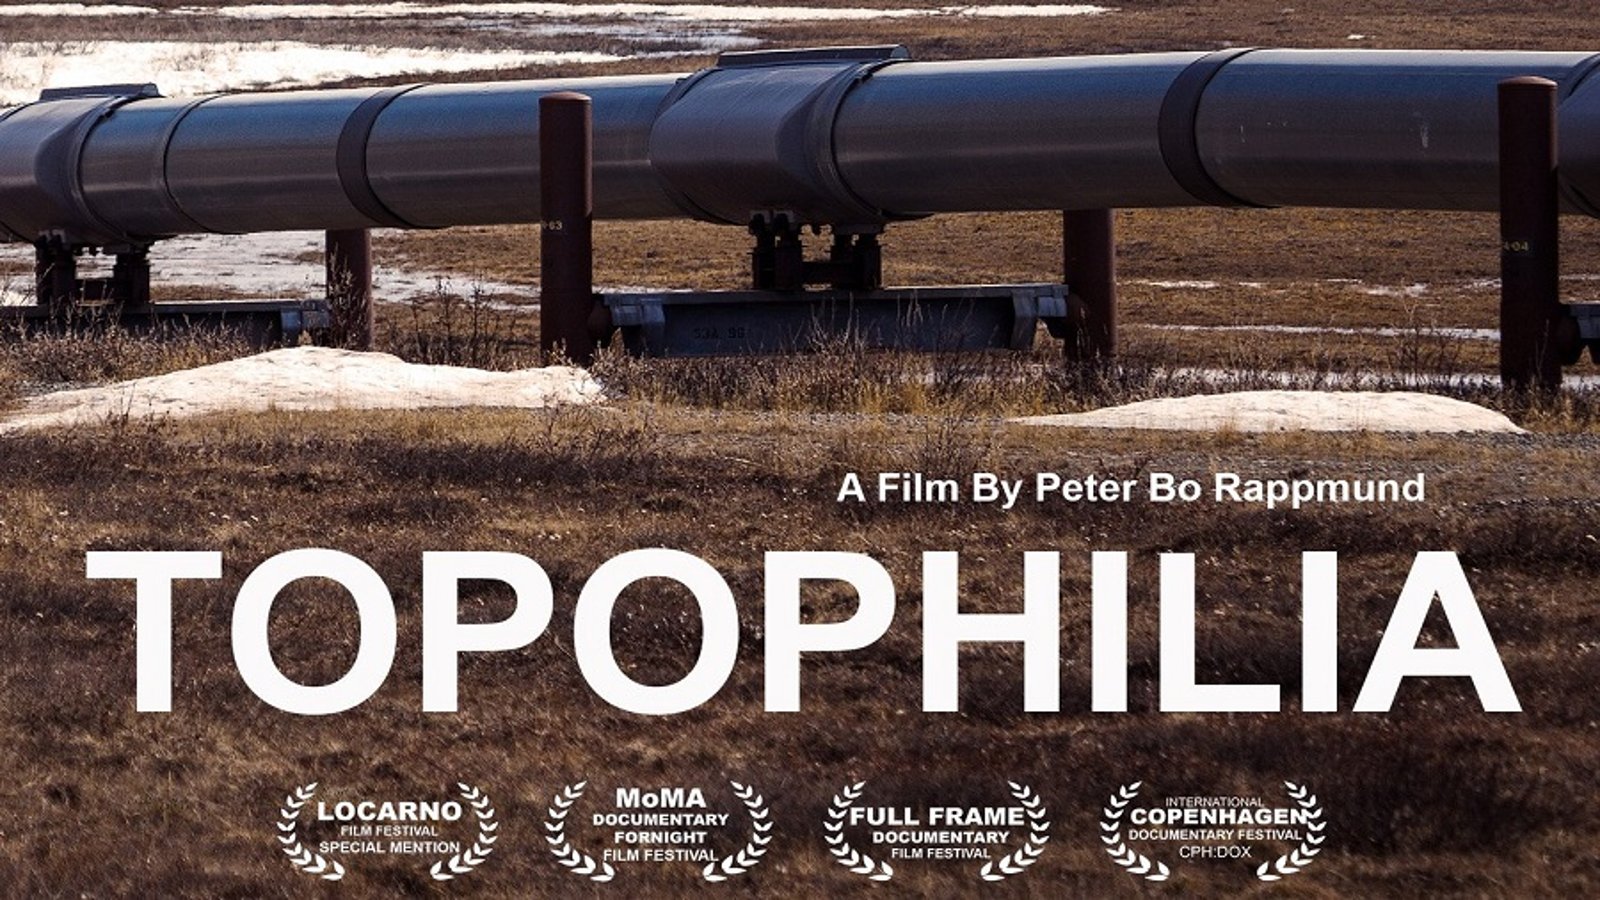 Topophilia - An Examination of Place and the Trans-Alaska Pipeline